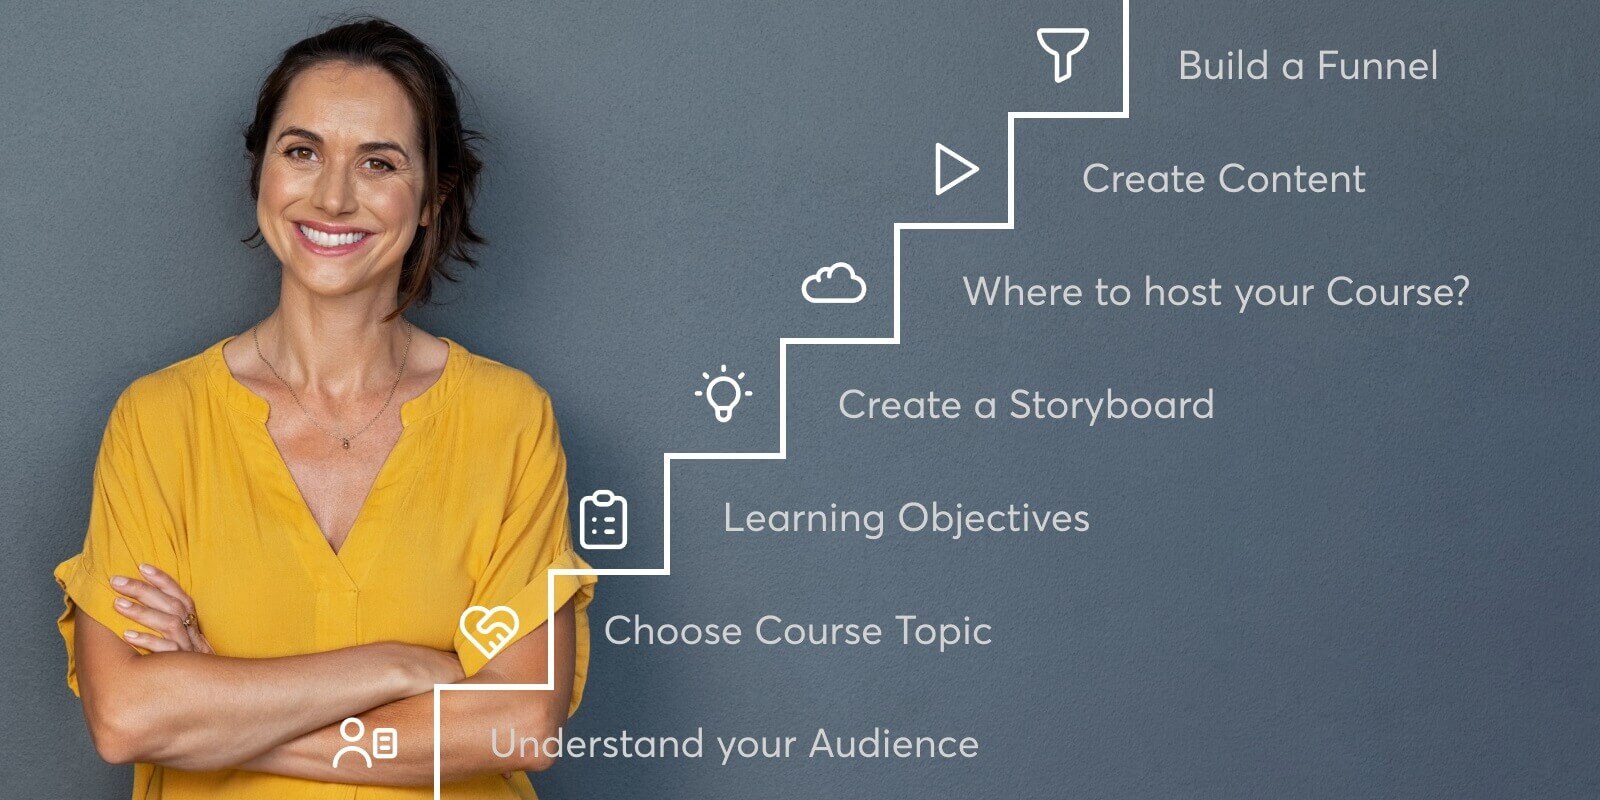 The 11 steps on how to create an online course. A visualization of the step-by-step process needed.